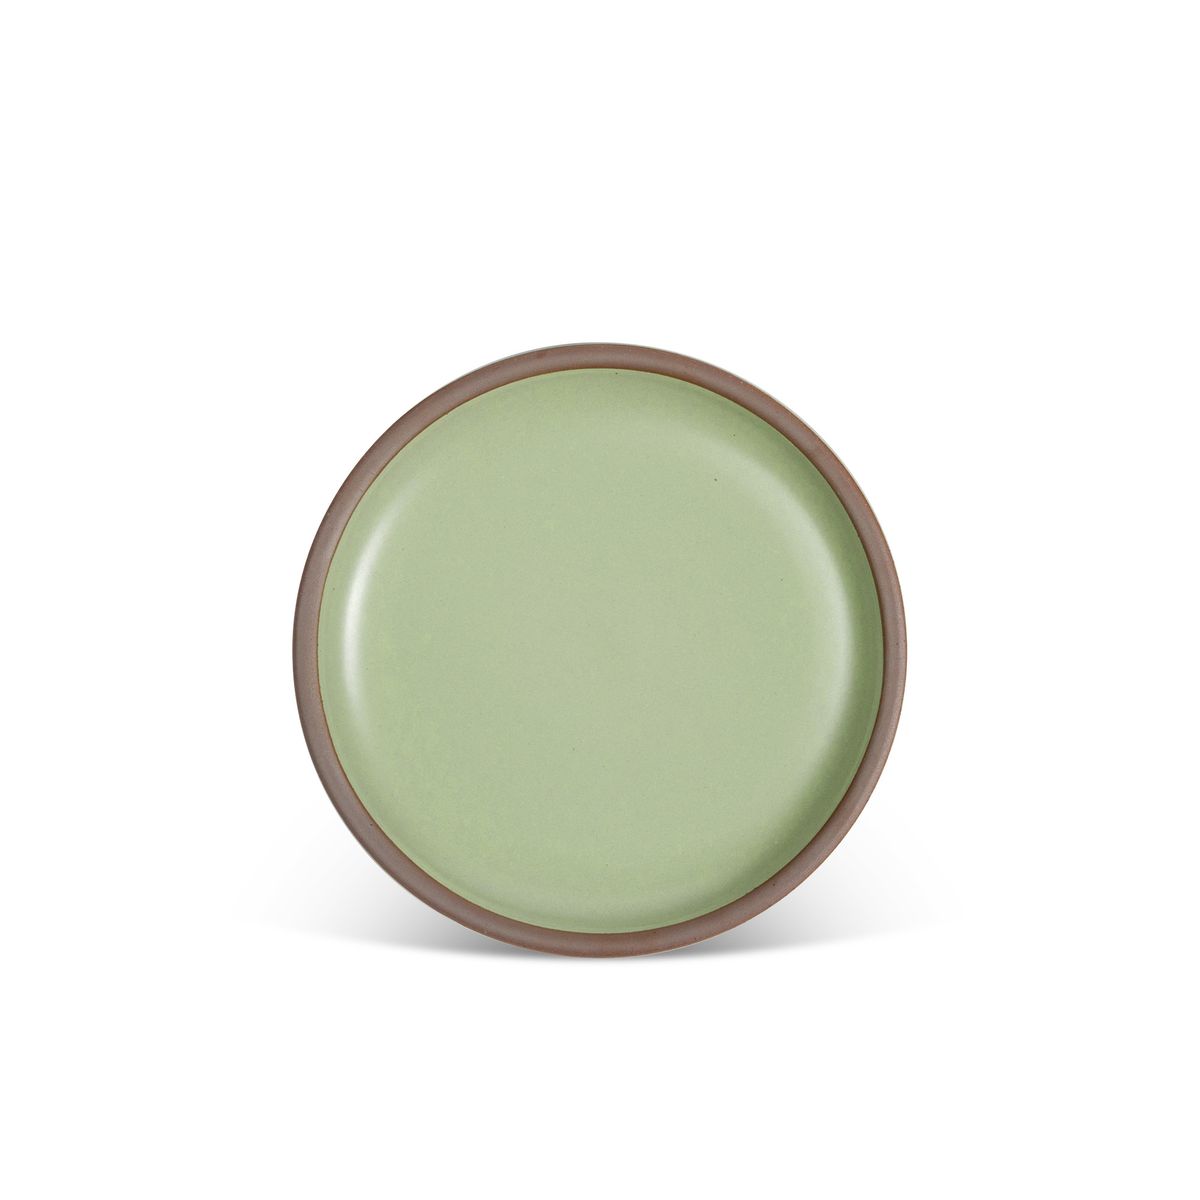 A medium sized ceramic plate in a calming sage green color featuring iron speckles and an unglazed rim.